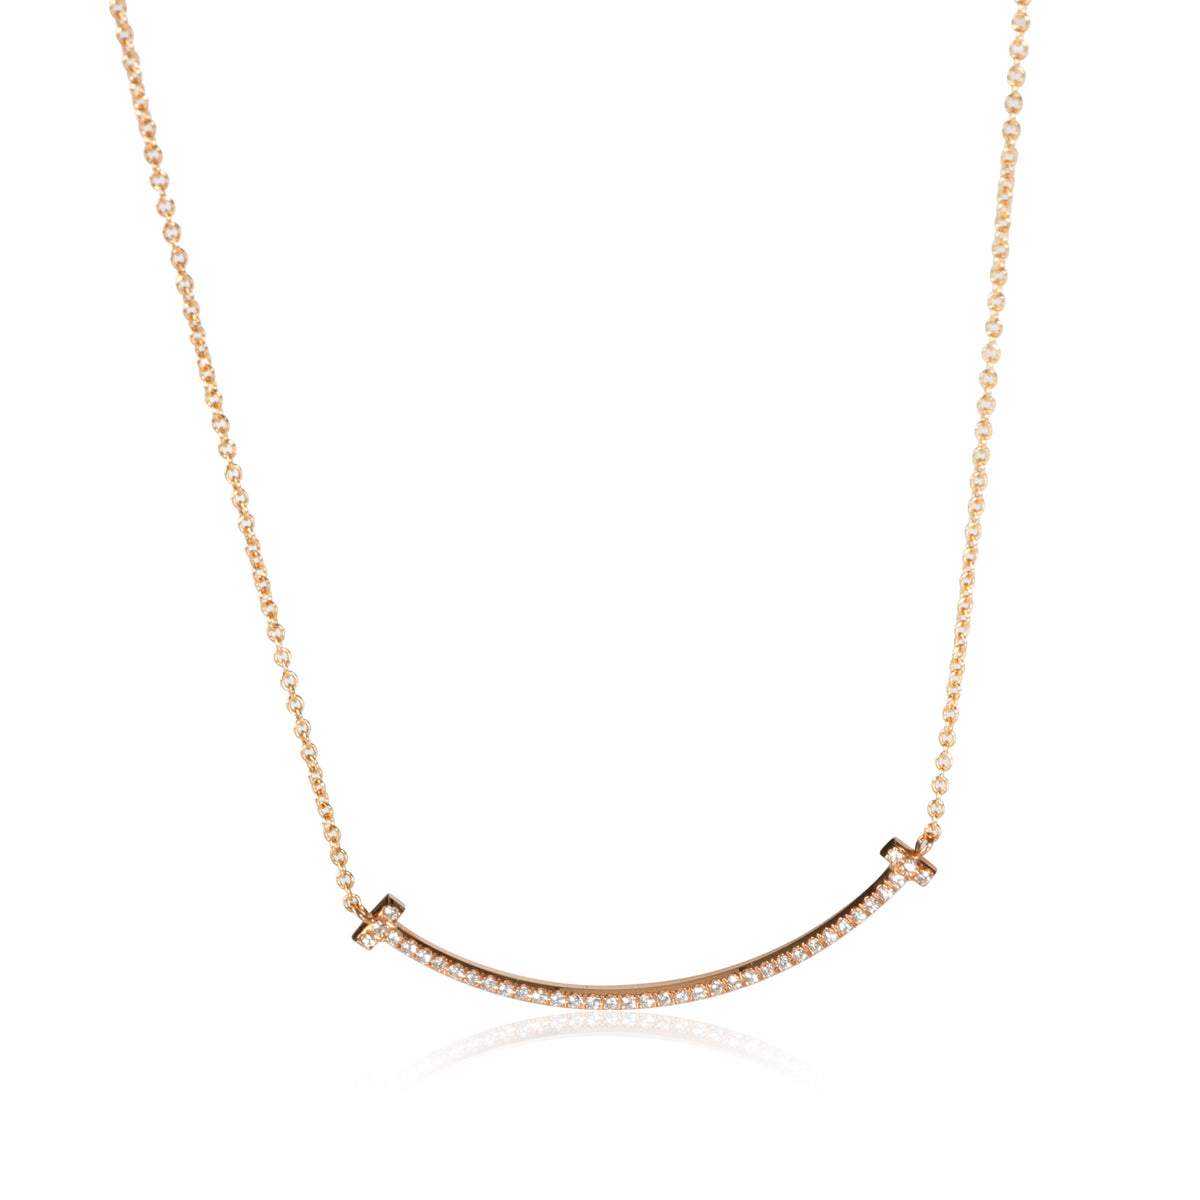 Tiffany & Co. T Smile Diamond Necklace in 18K Rose Gold 0.10 CTW